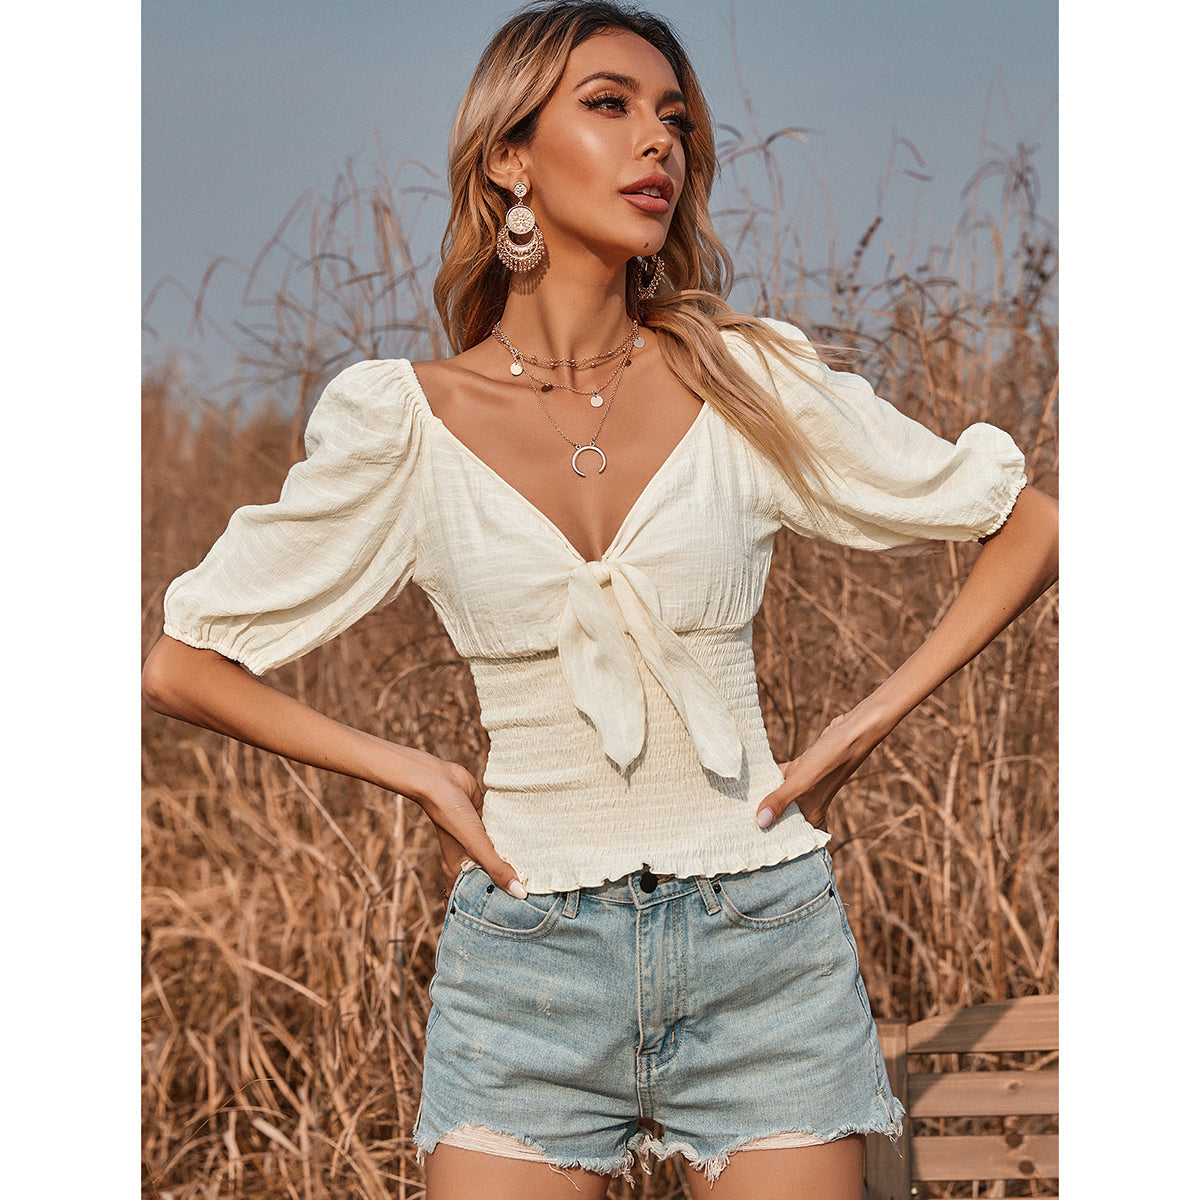 V-neck Bow Tie Puff Sleeve Sexy Top Blouse Sai Feel